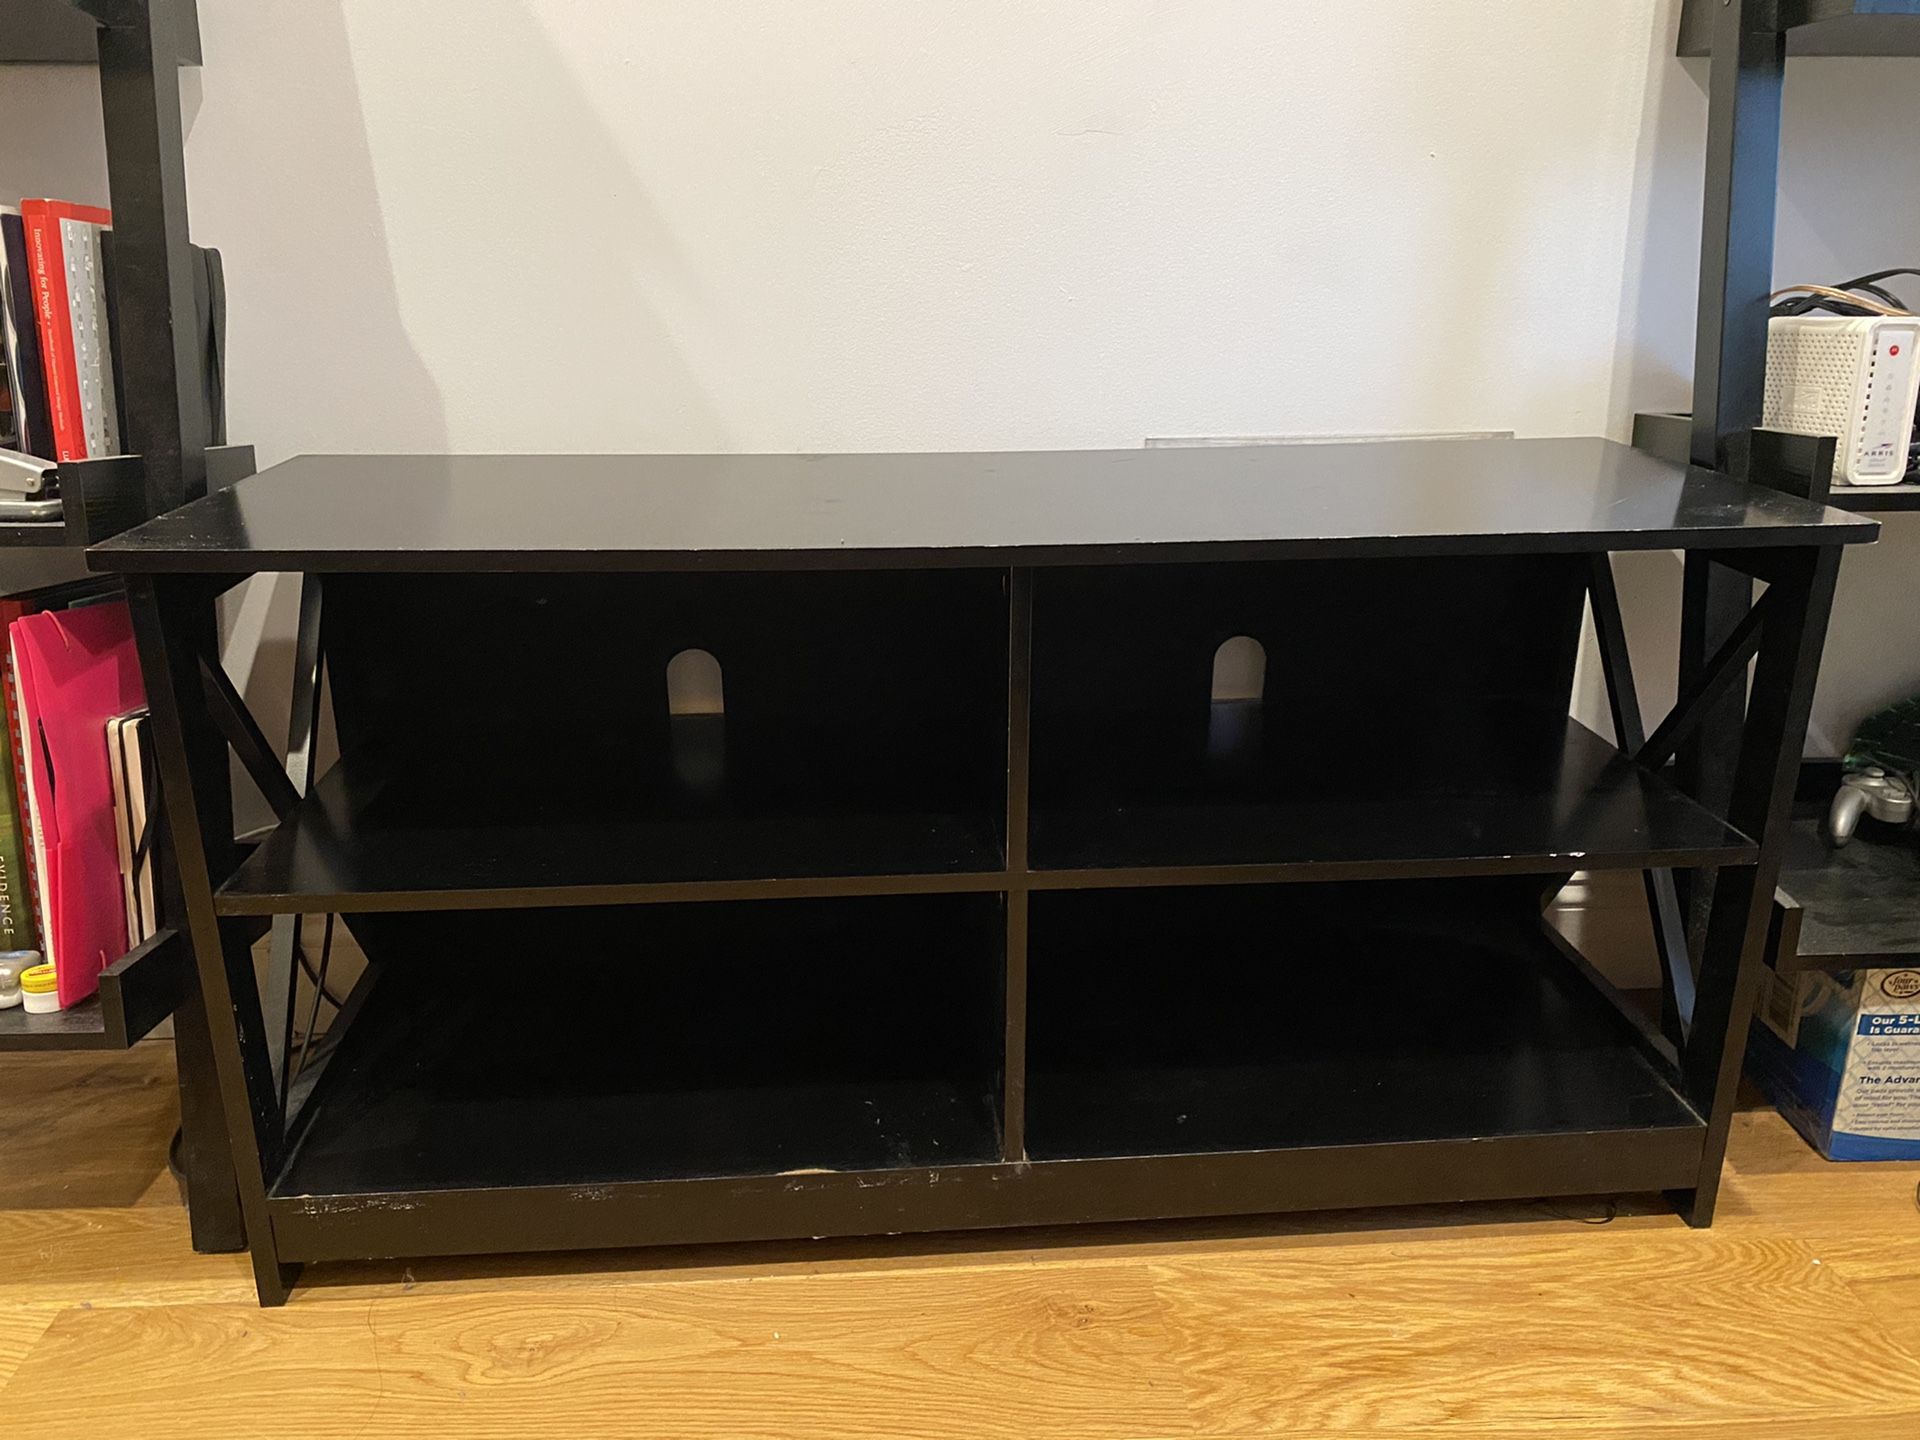 TV console table